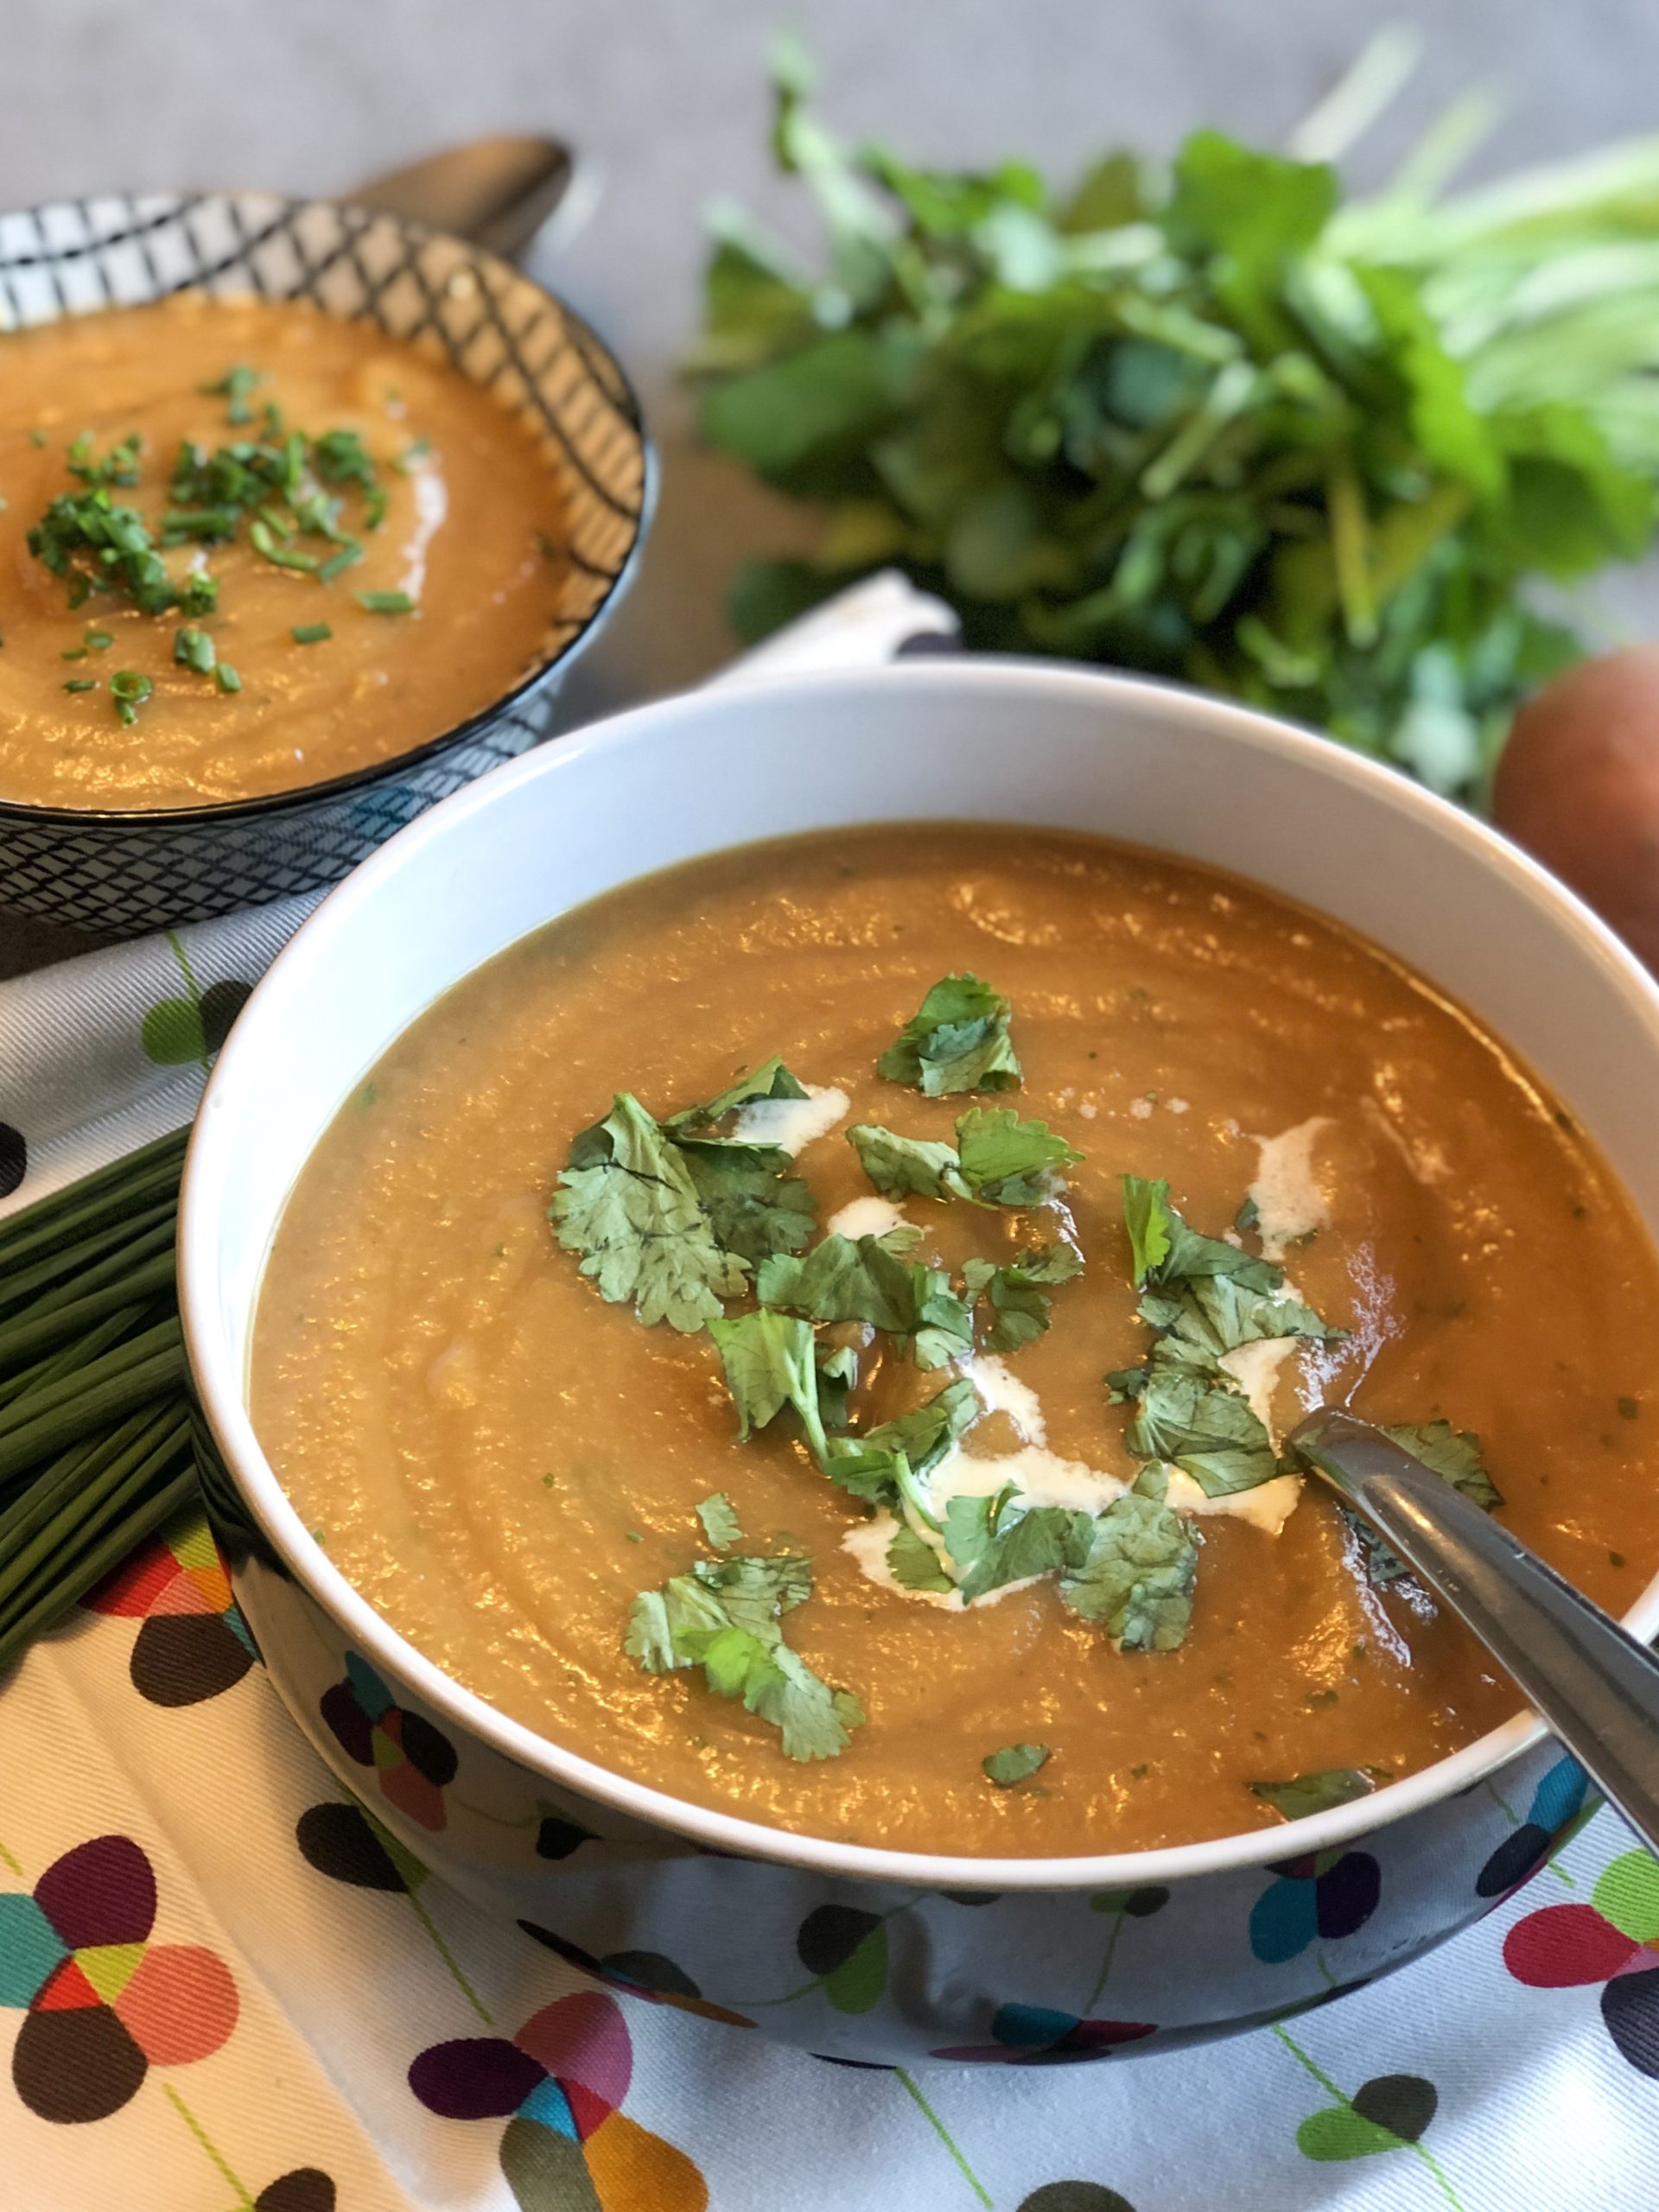 Easy and quick Carrot soup recipe, lovely bowl of heartwarming soup